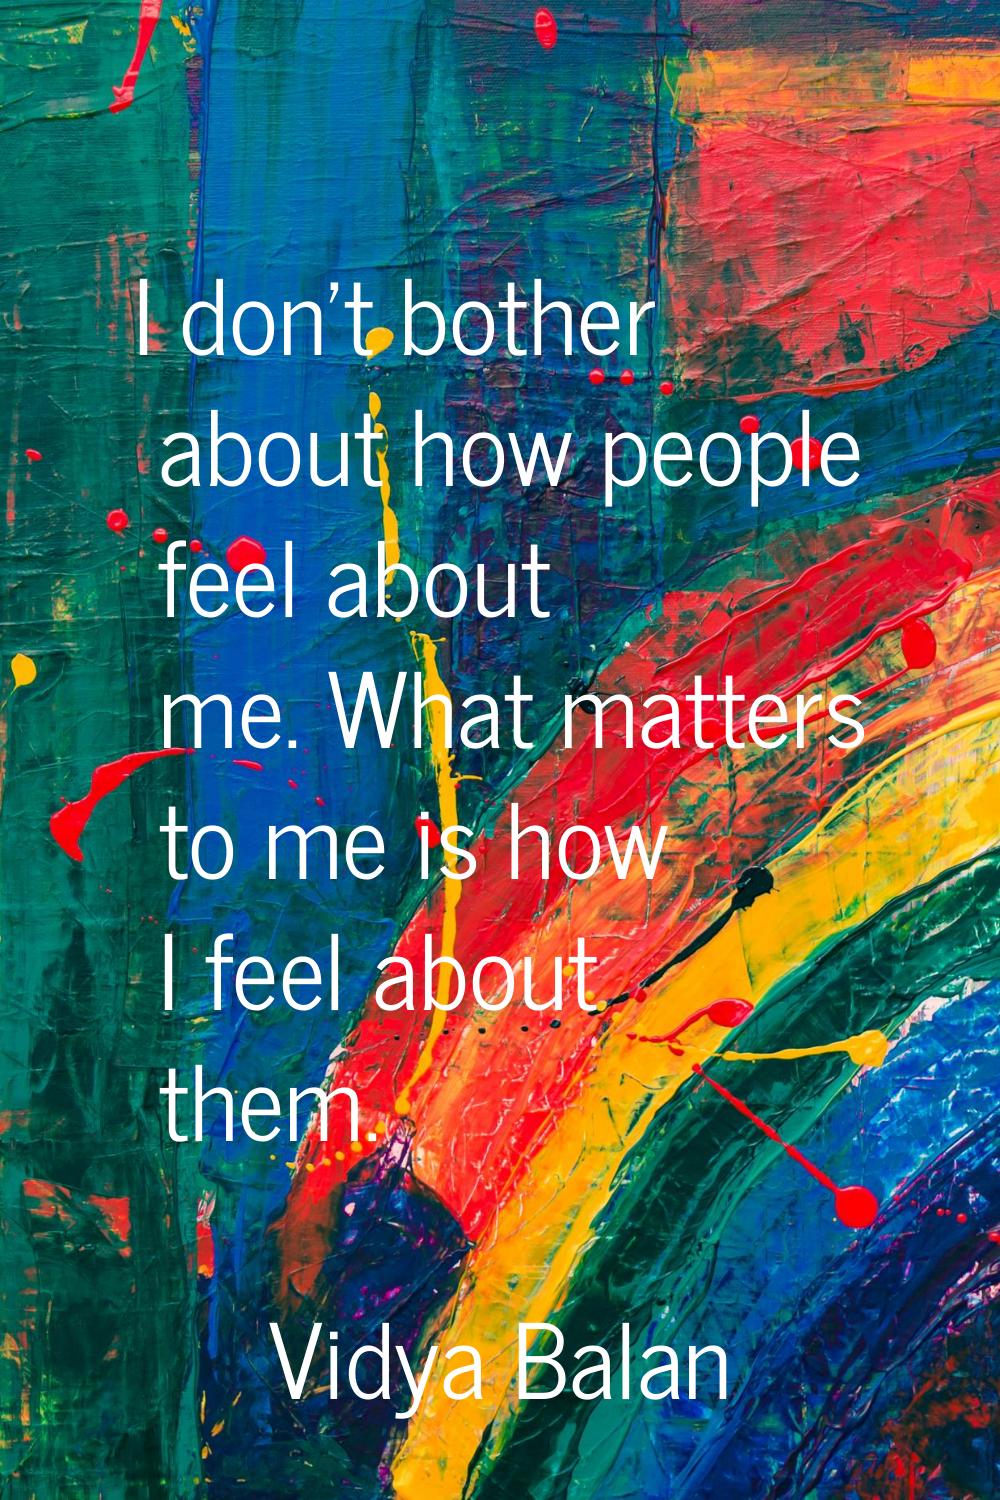 I don't bother about how people feel about me. What matters to me is how I feel about them.